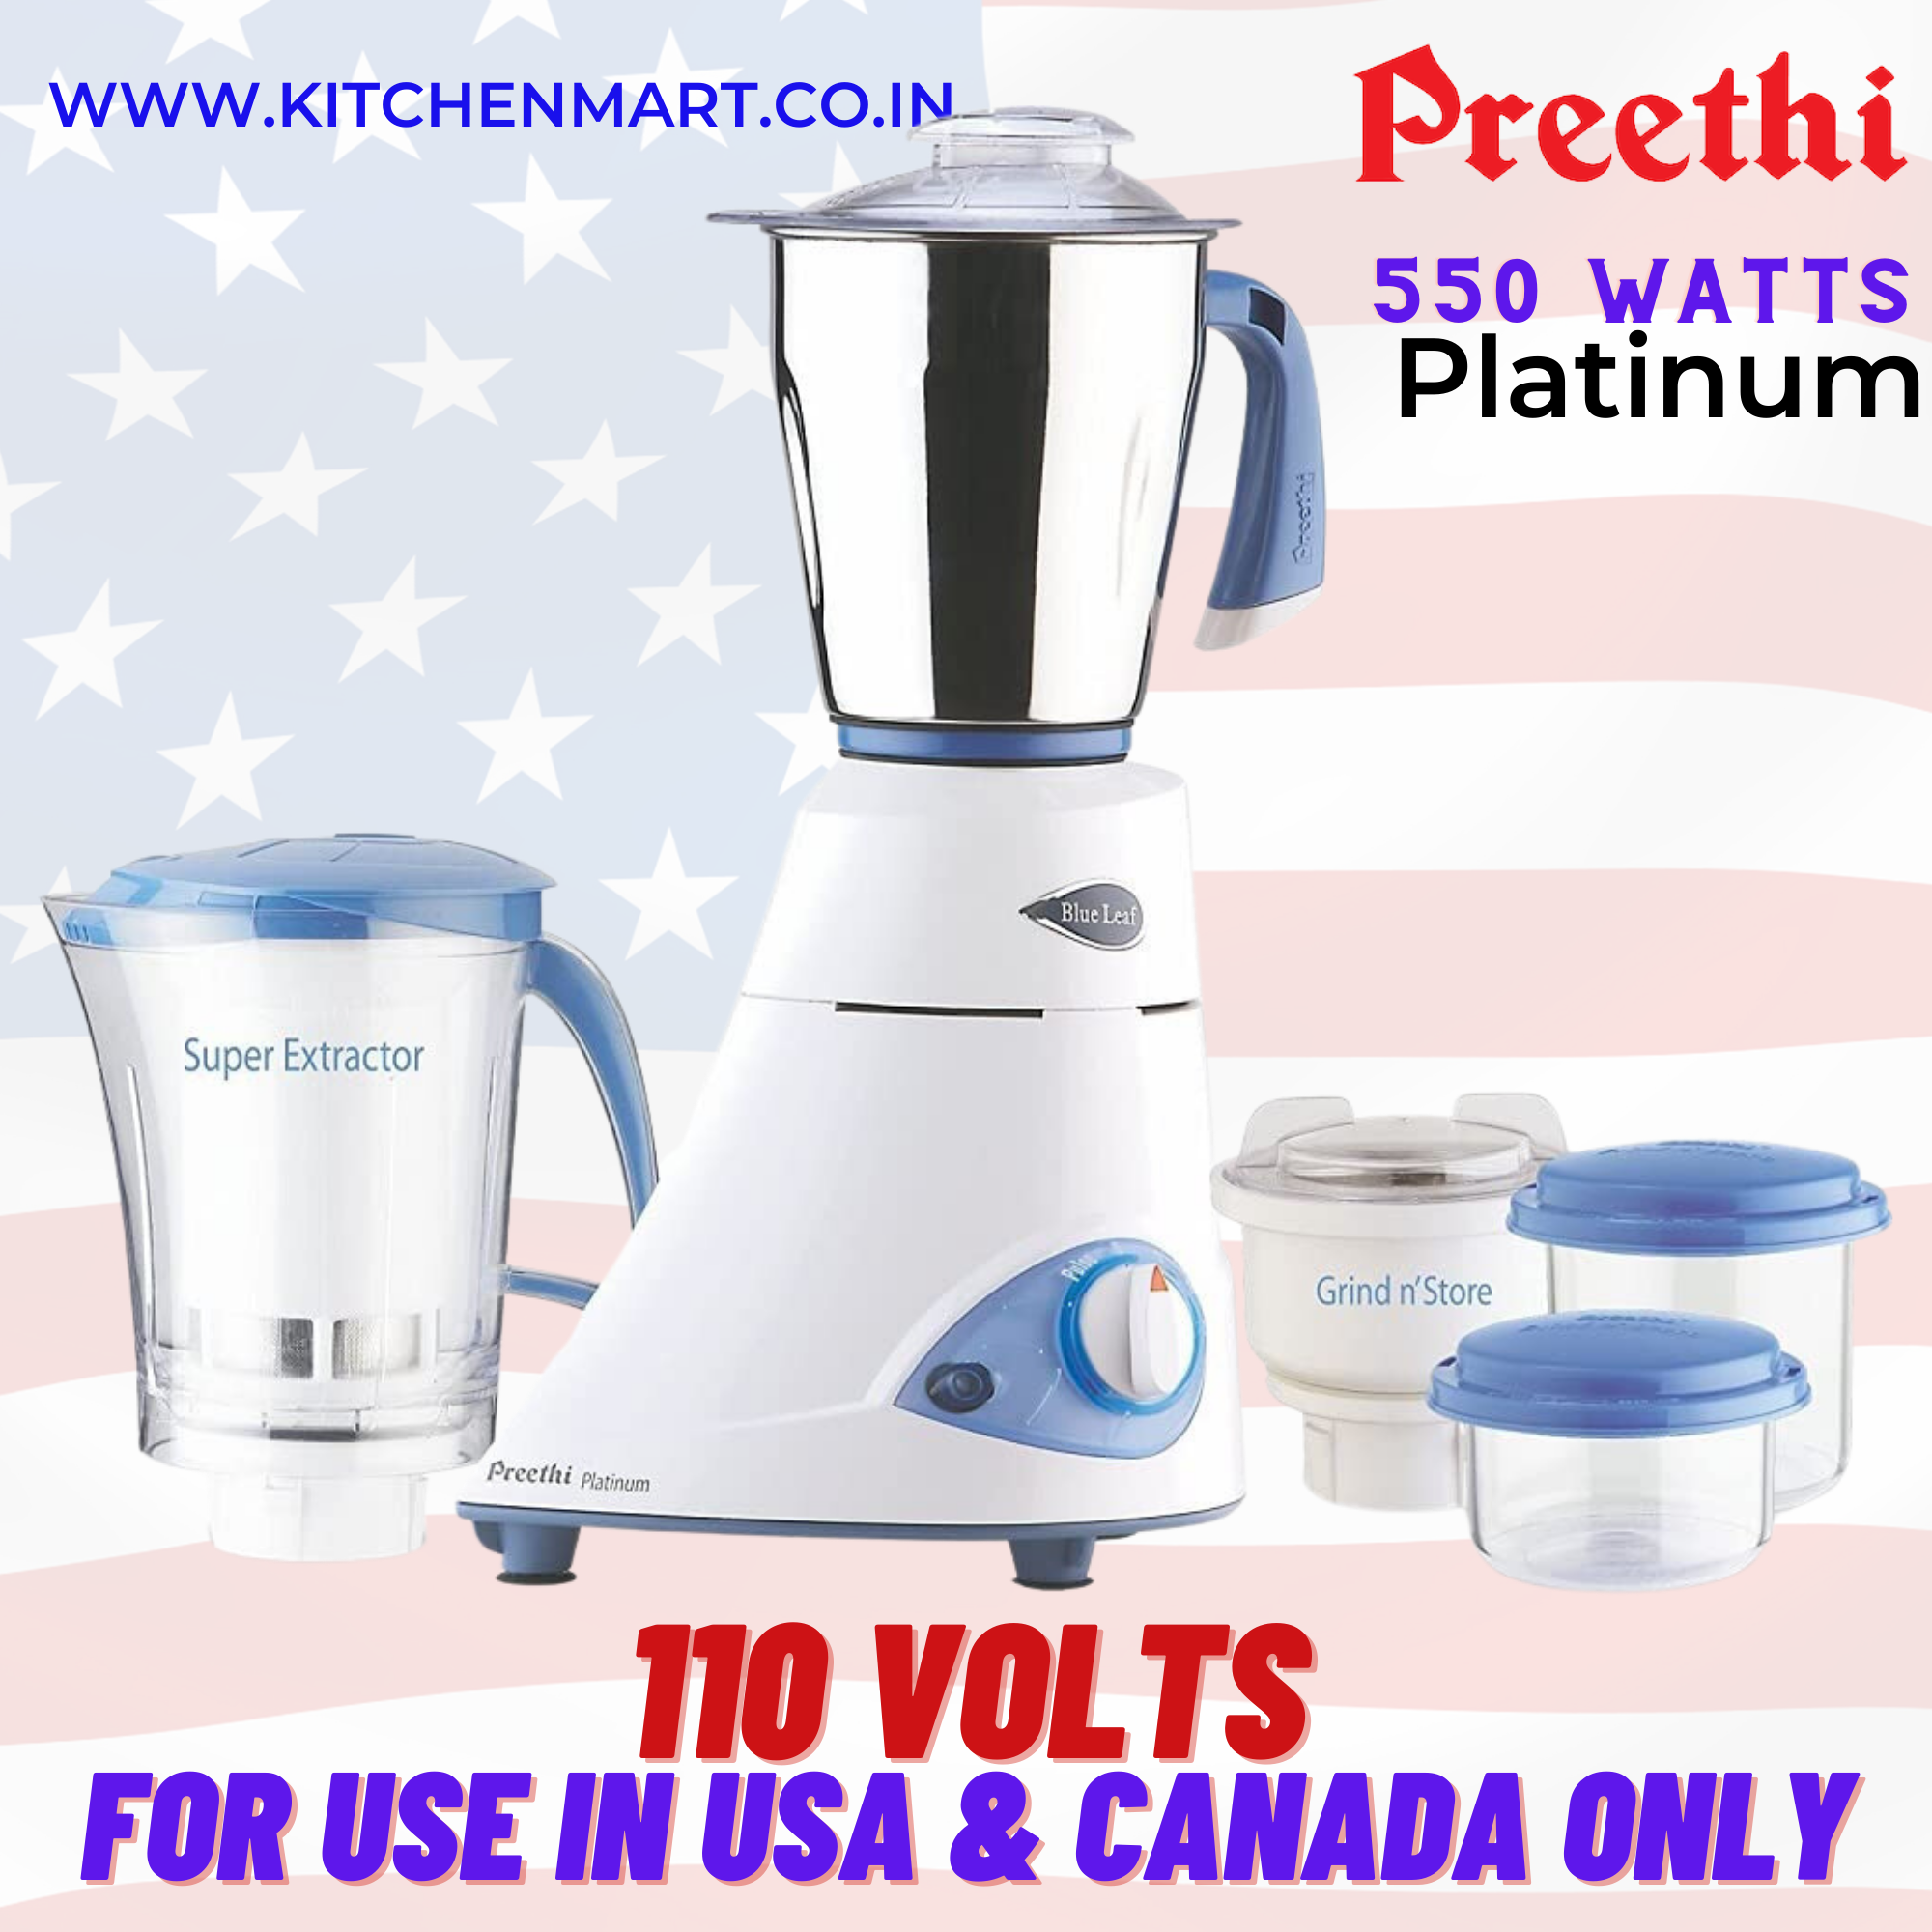 Preethi Platinum MG-153 550-Watt Mixer Grinder (White/Blue) 110 volts for use in USA and canada only